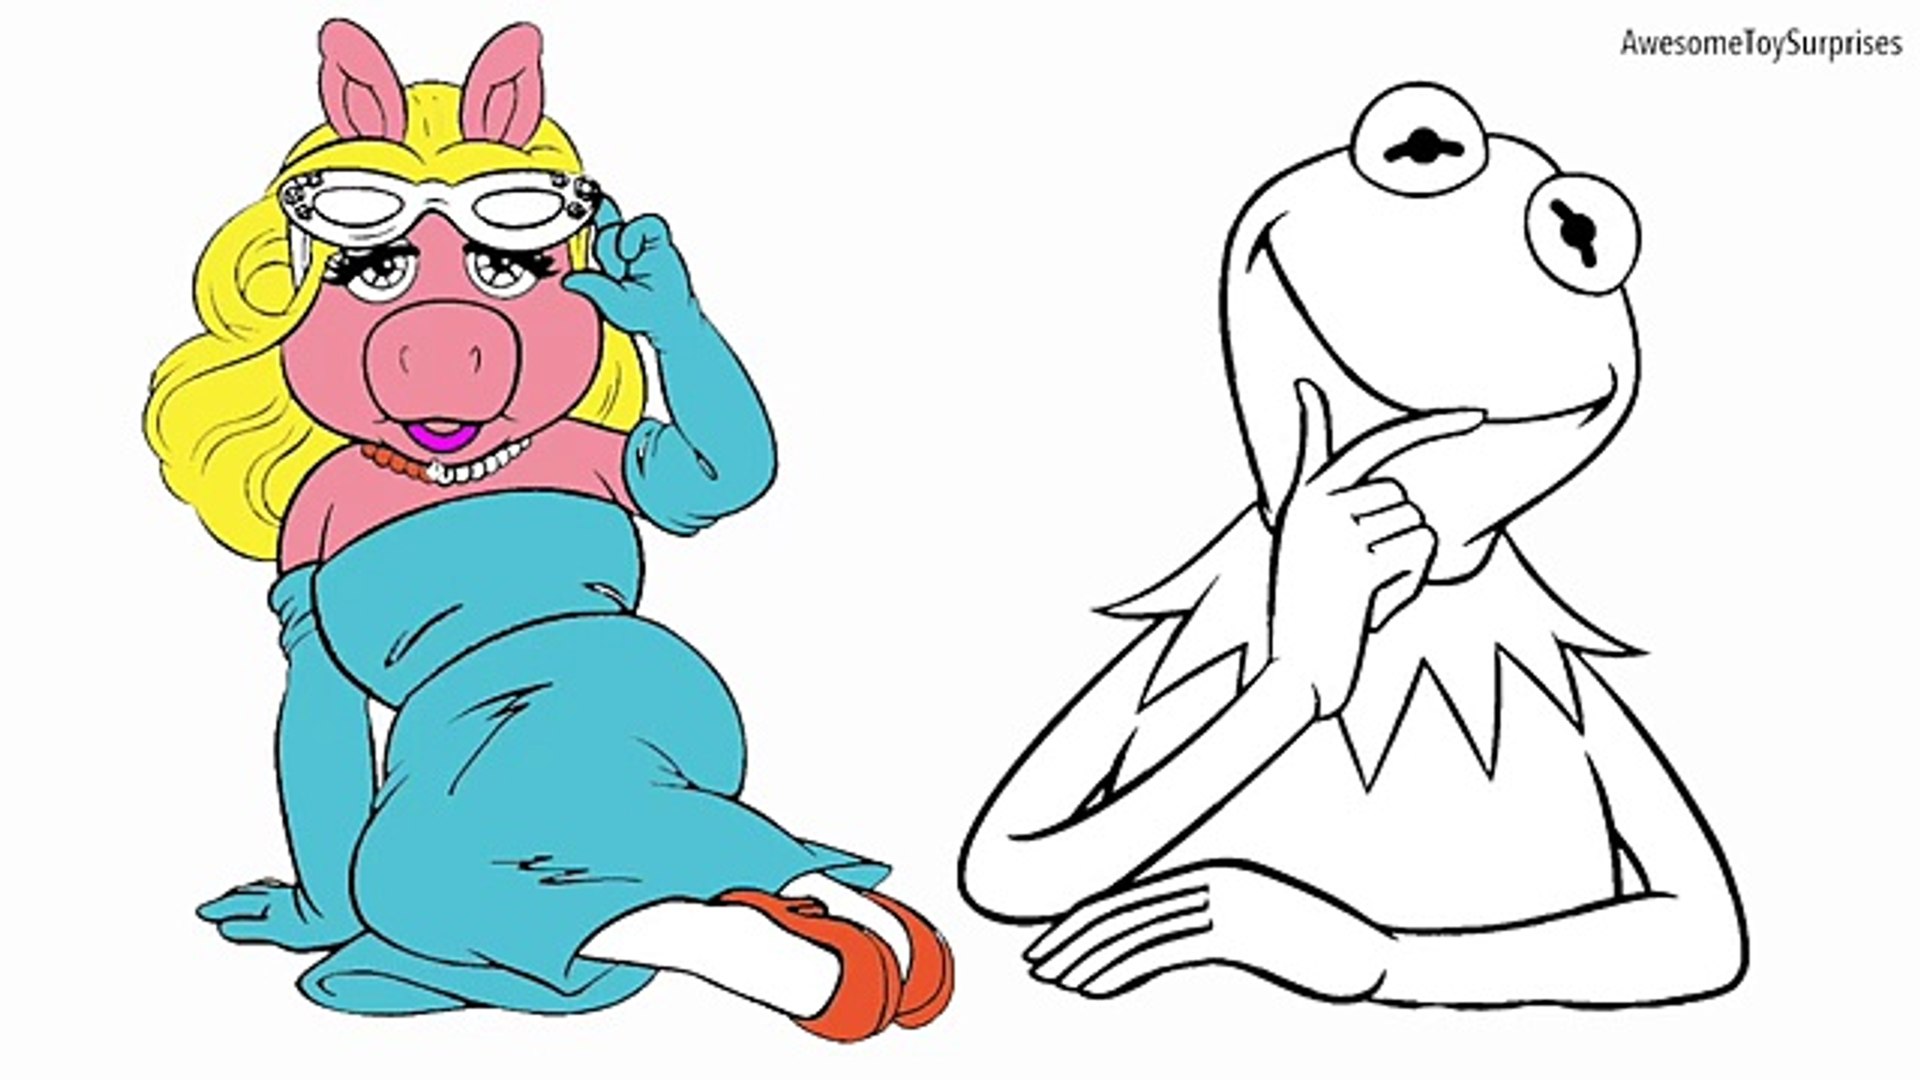 Miss Piggy And Kermit The Frog Muppets Coloring Page Fun Coloring Activity Video Dailymotion